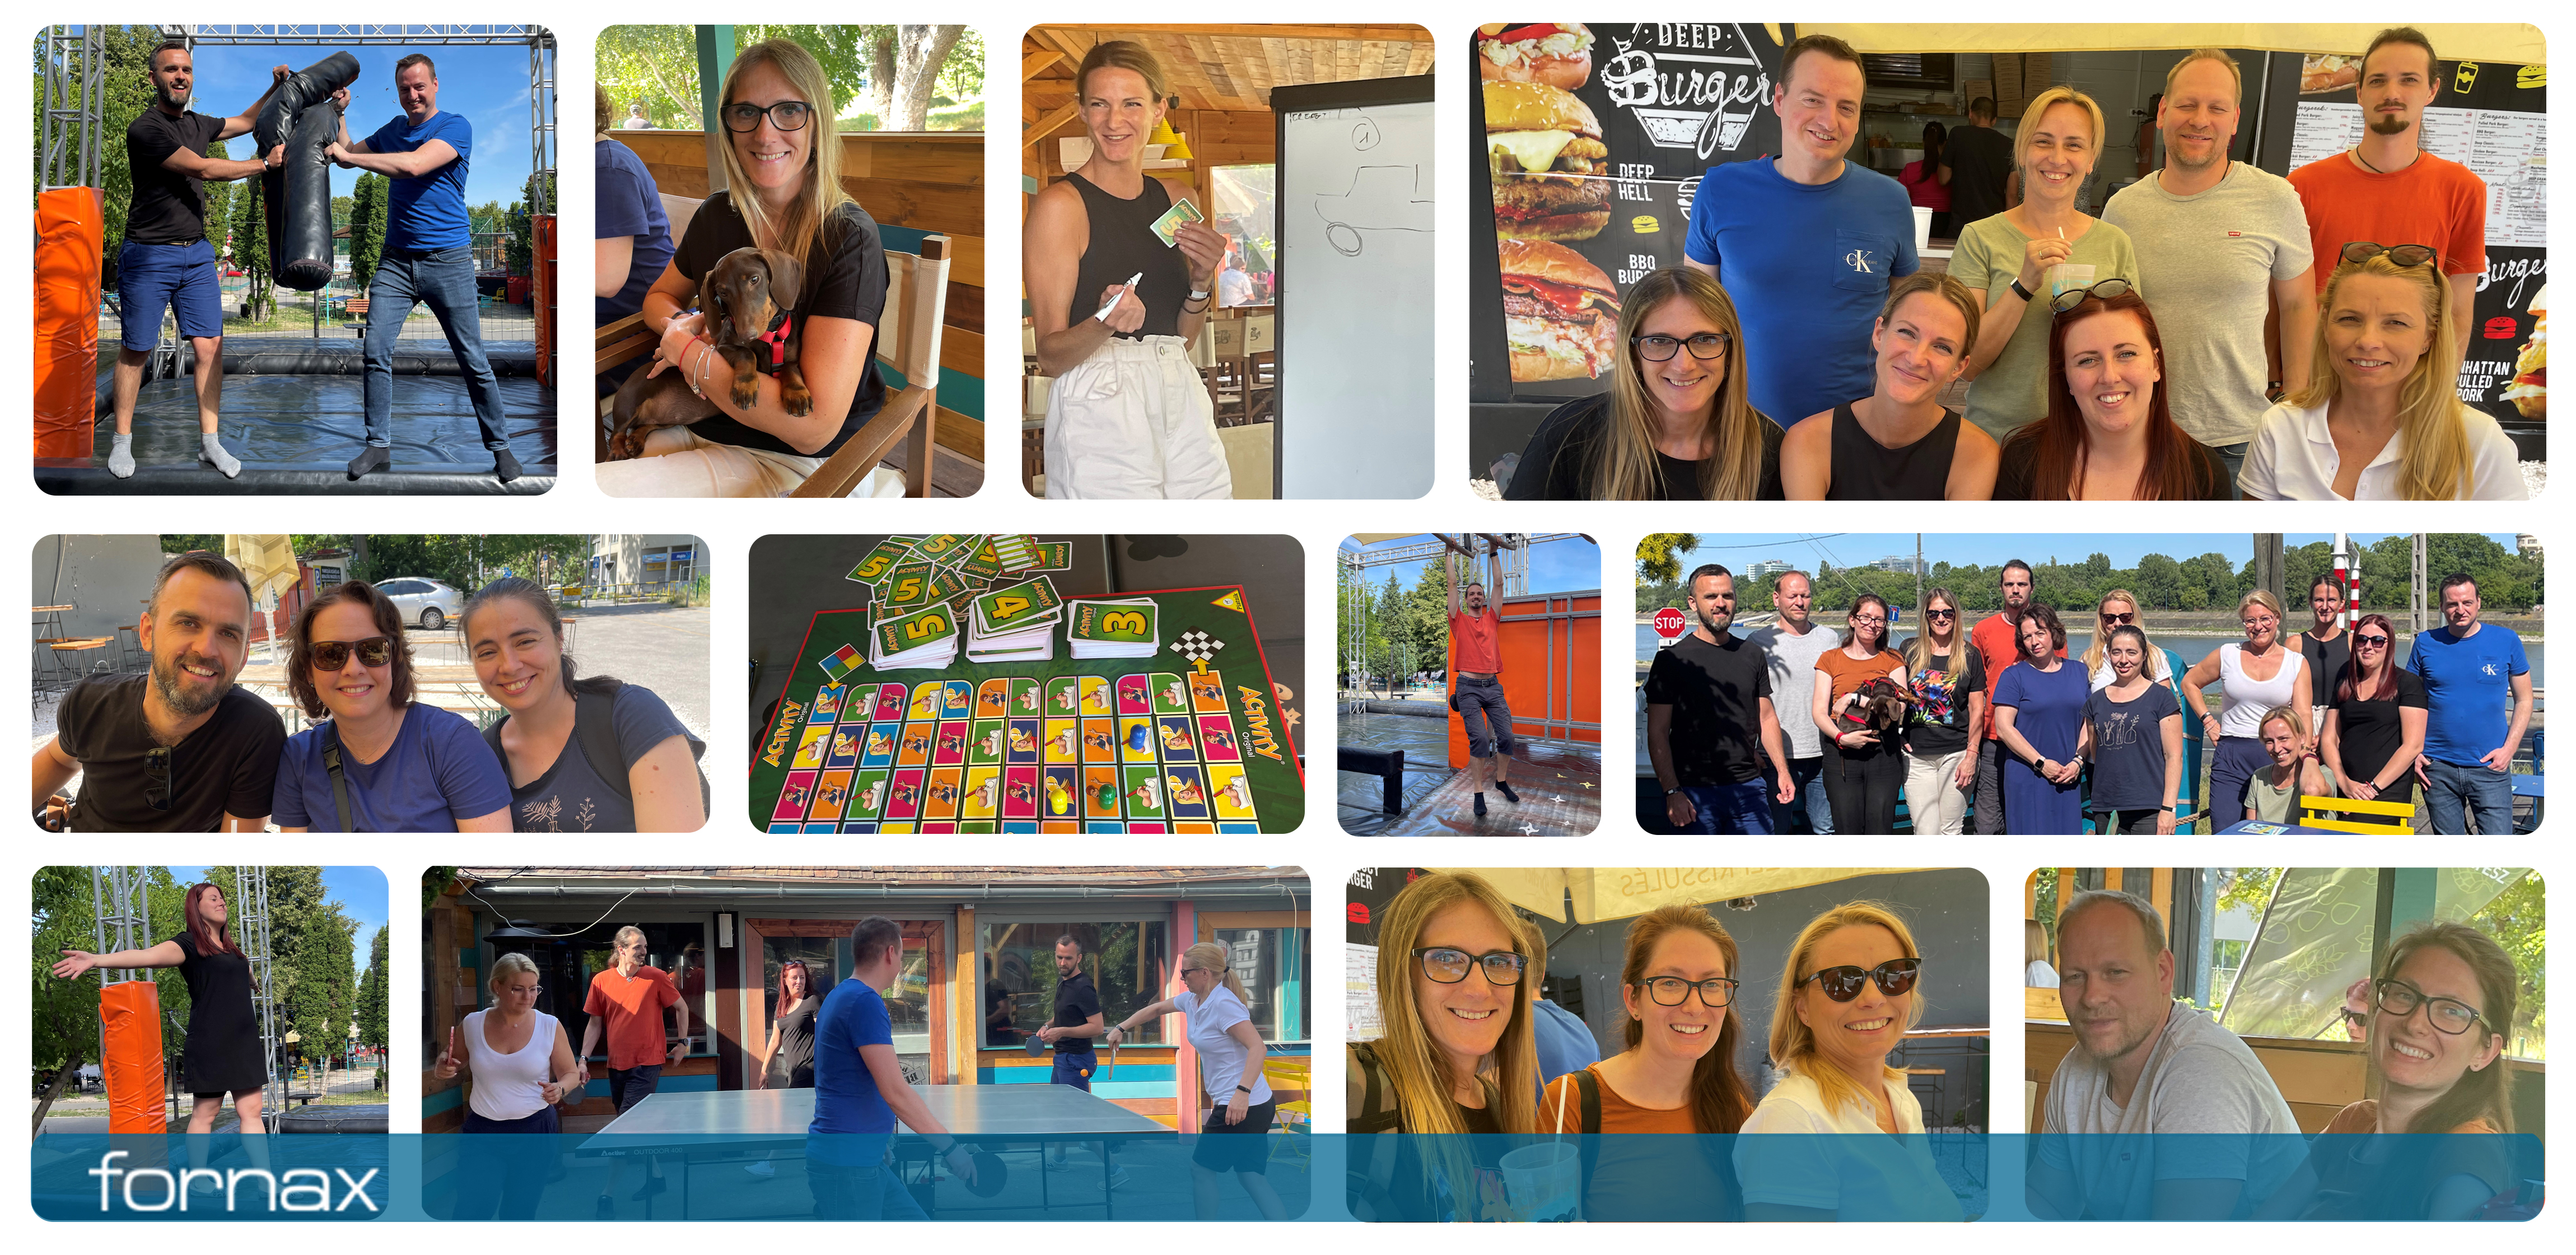 The finance team of the Fornax company group greeted the summer with a team building